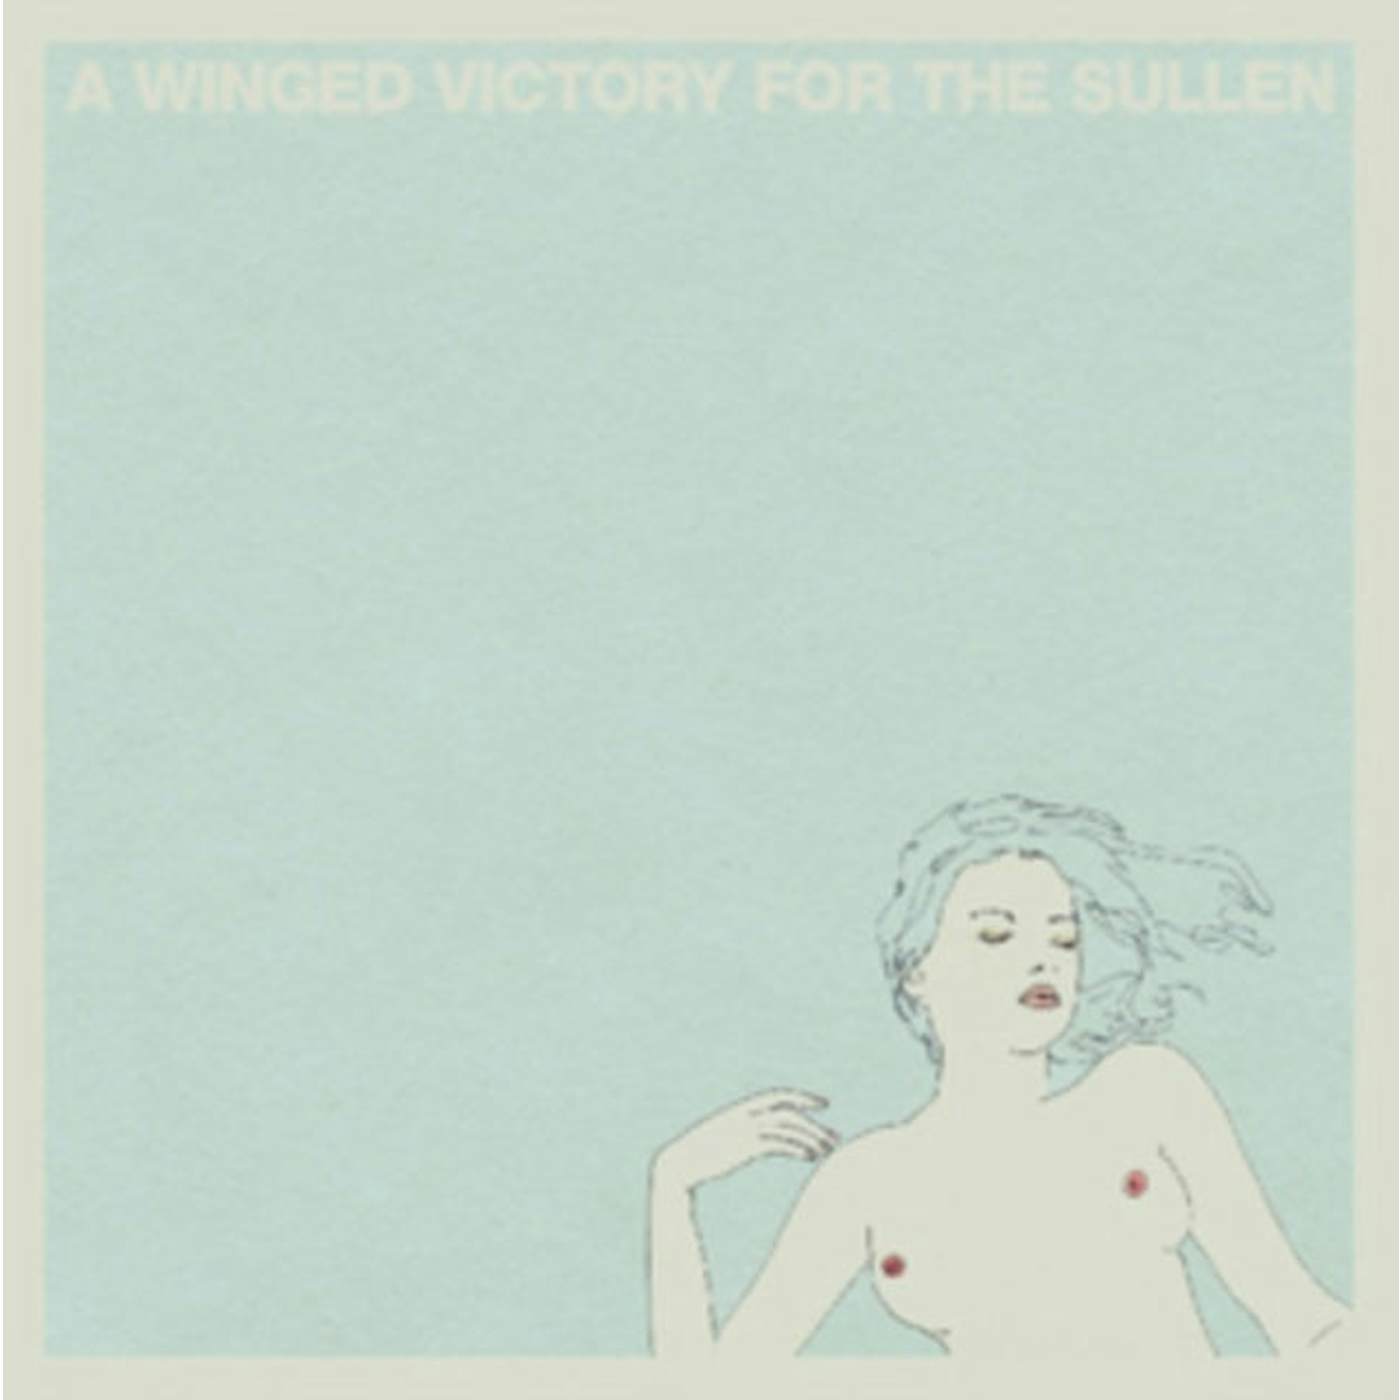 A Winged Victory For The Sullen CD - A Winged Victory For The Sullen